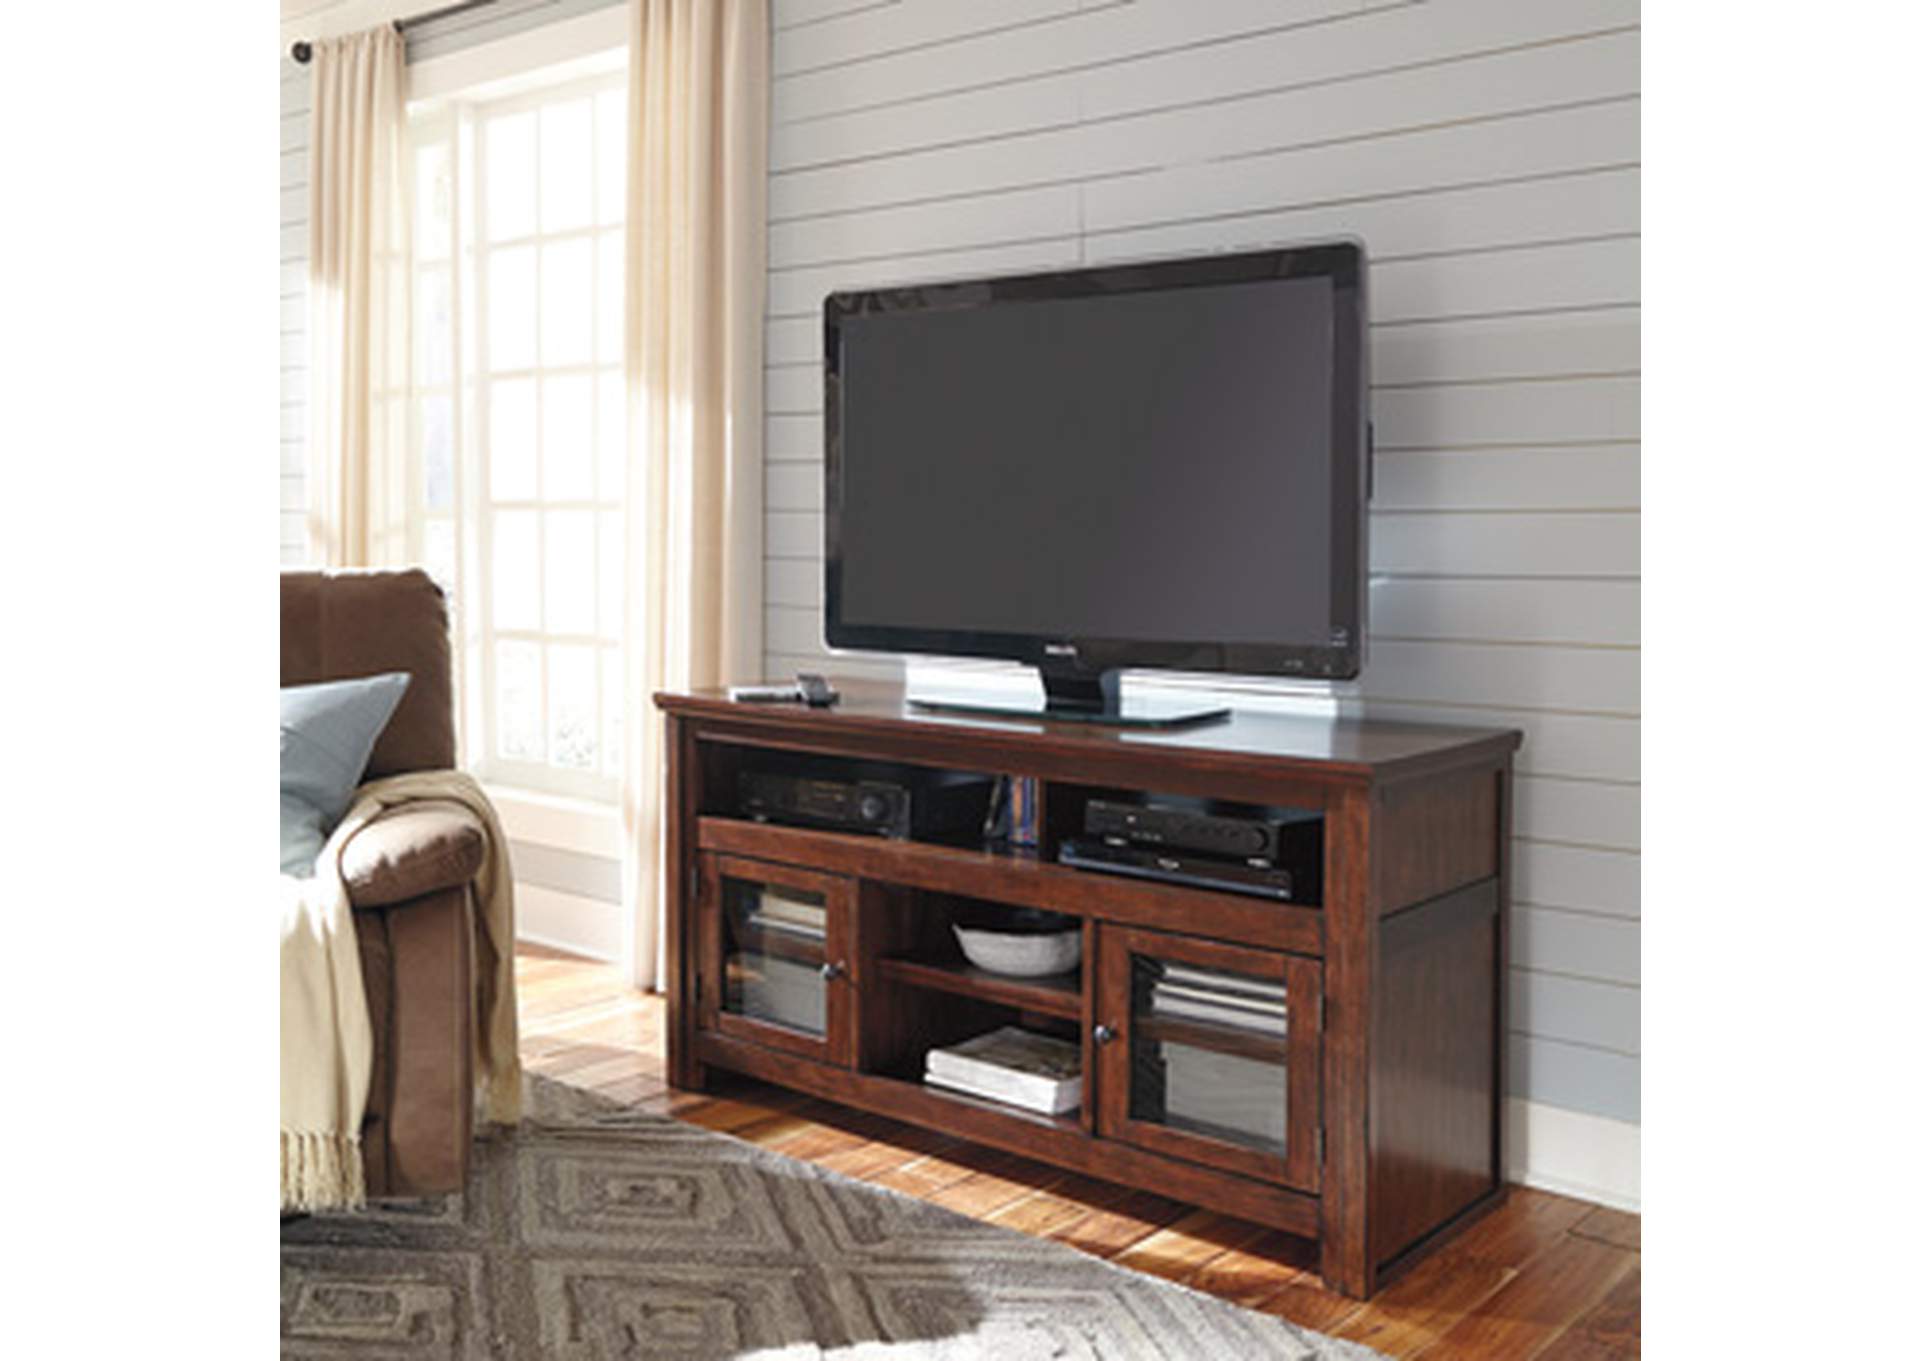 Harpan 60" TV Stand,Signature Design By Ashley